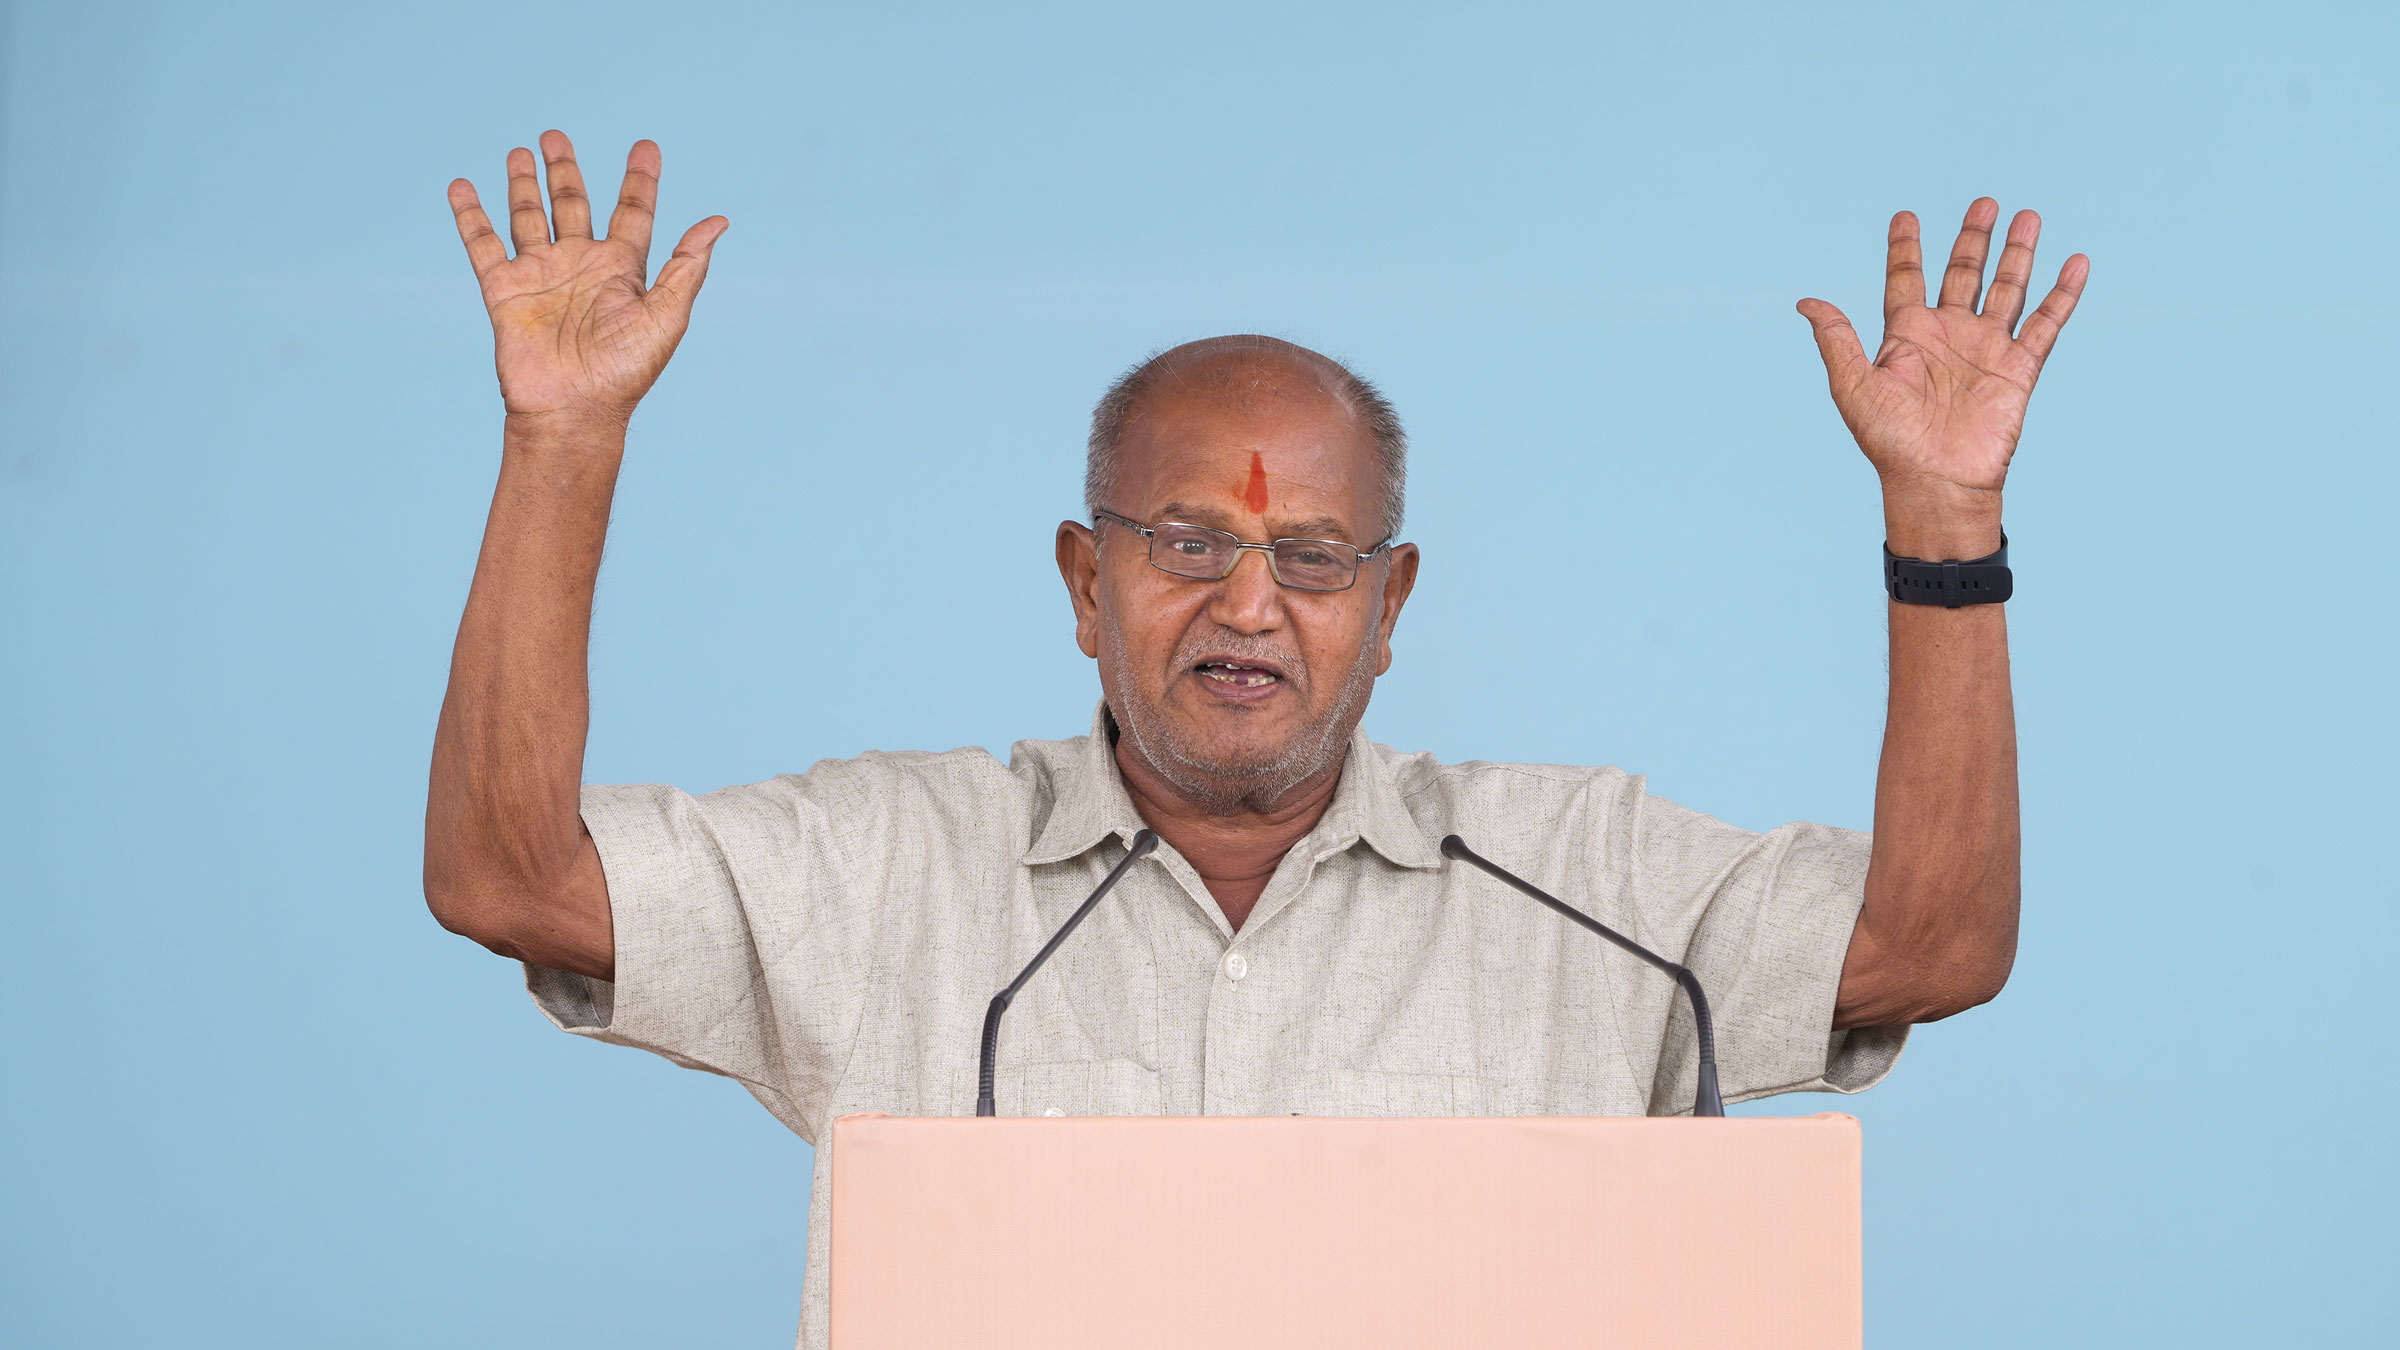 Mr Motilal Rathi (Founder Member, Hindu Utsav Samiti, Bareli, Madhya Pradesh) said - I am delighted to see the revered energy in women and the spiritual power of Saints in Hindu Dharma. I am 72 years old; however, after coming here, I feel energetic and enthusiastic like a 27-year-old.